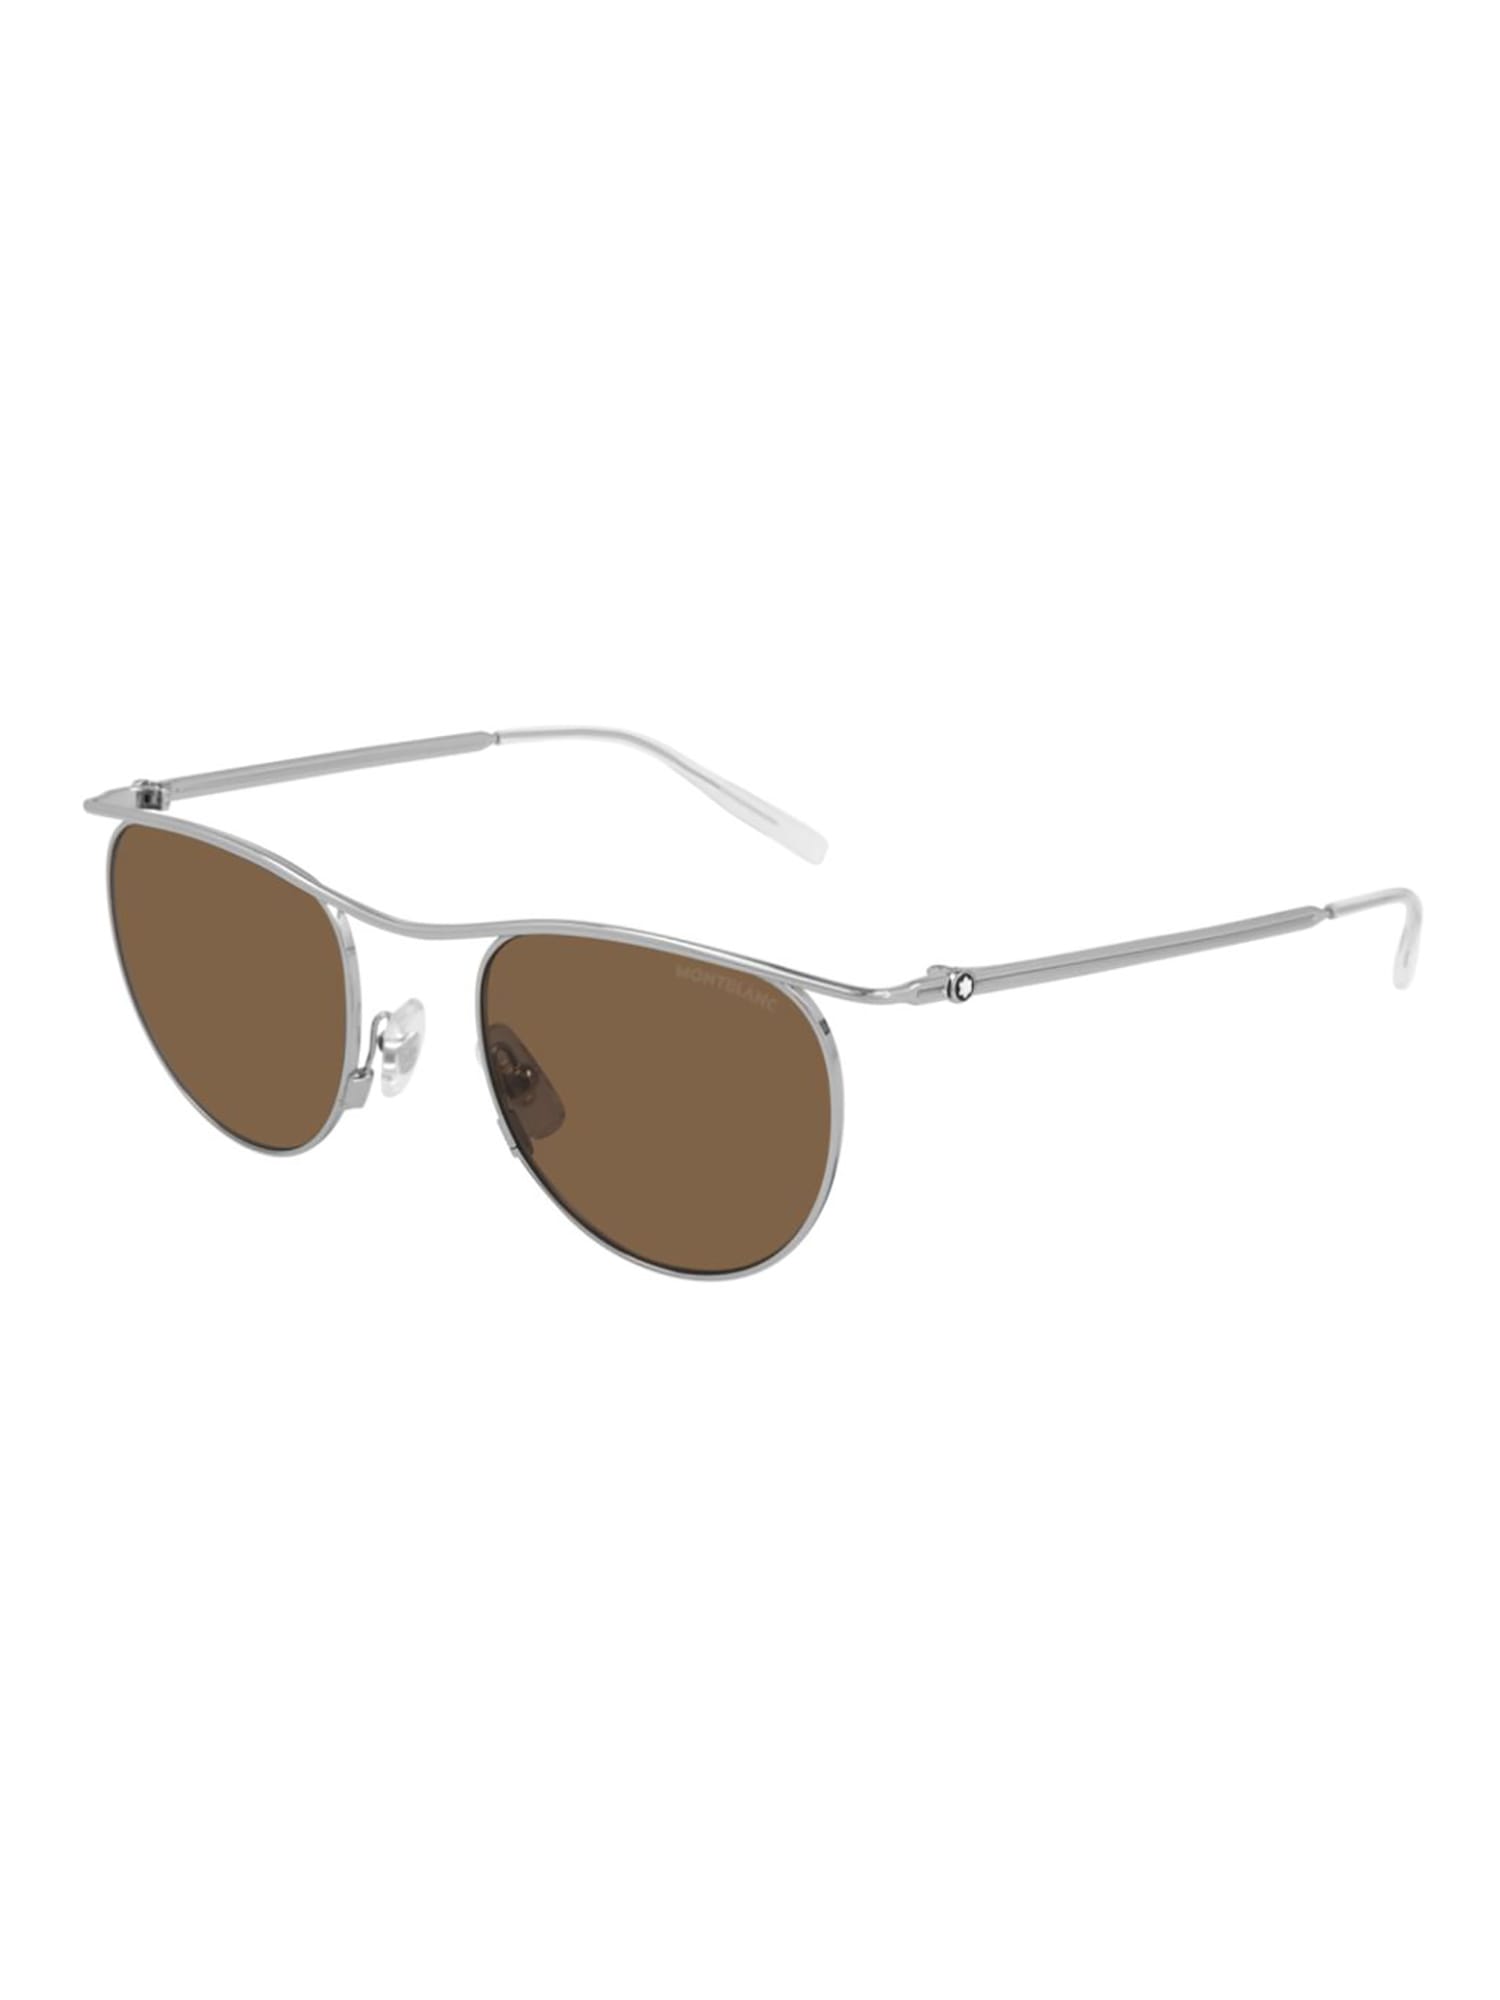 Montblanc Mb0168s Sunglasses In Silver Silver Brown